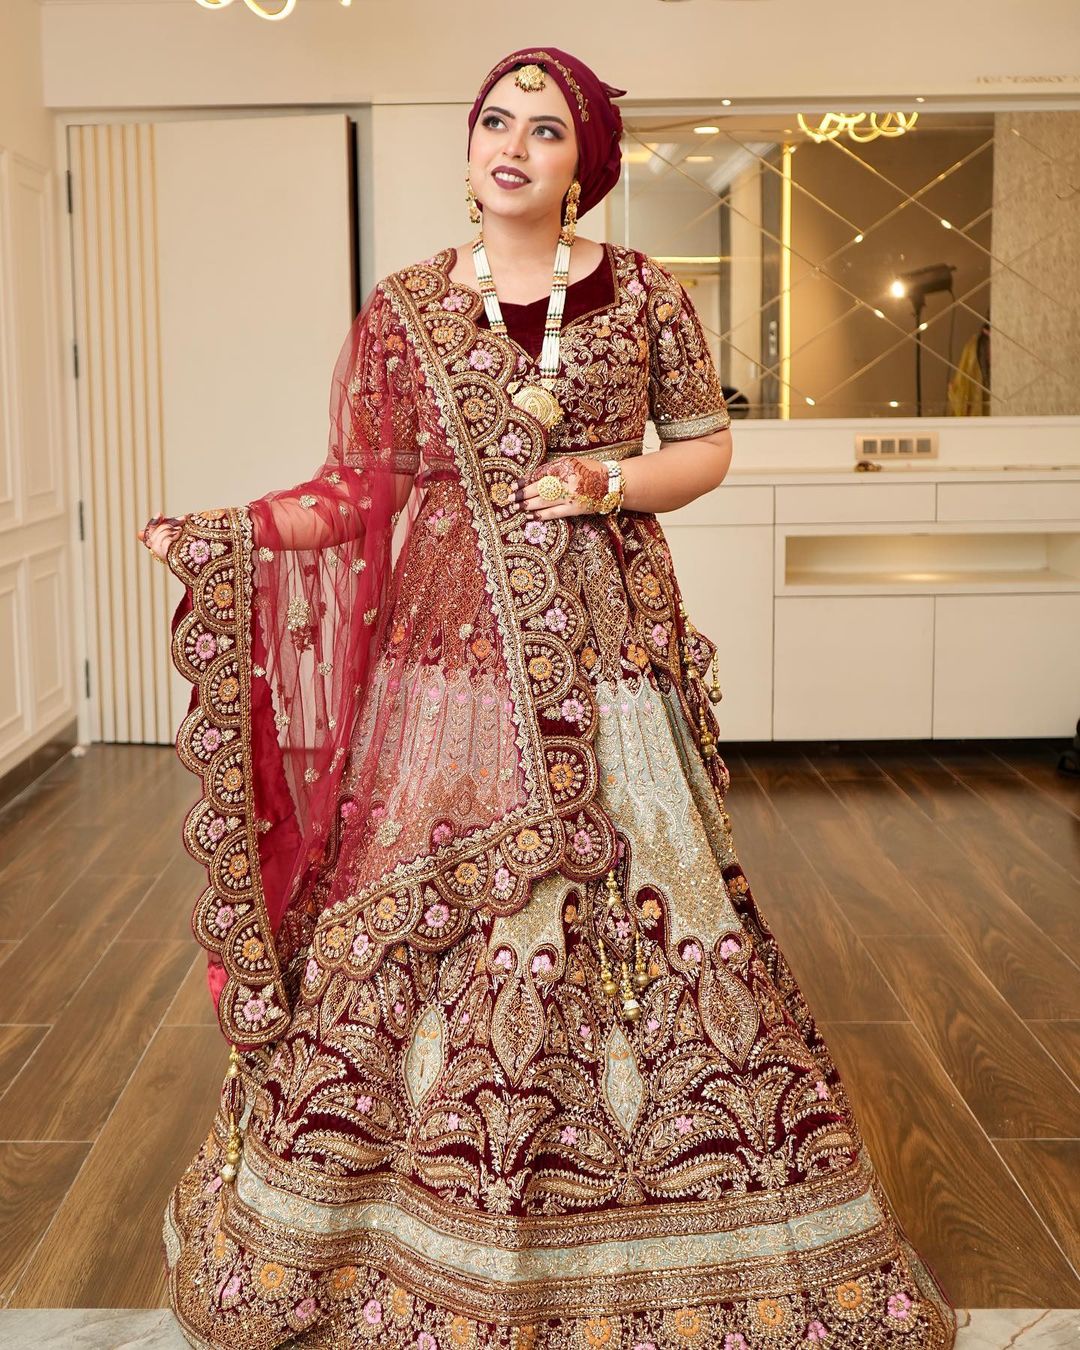 The D-Day should also include Maroon Bridal Lehengas | Empress Clothing